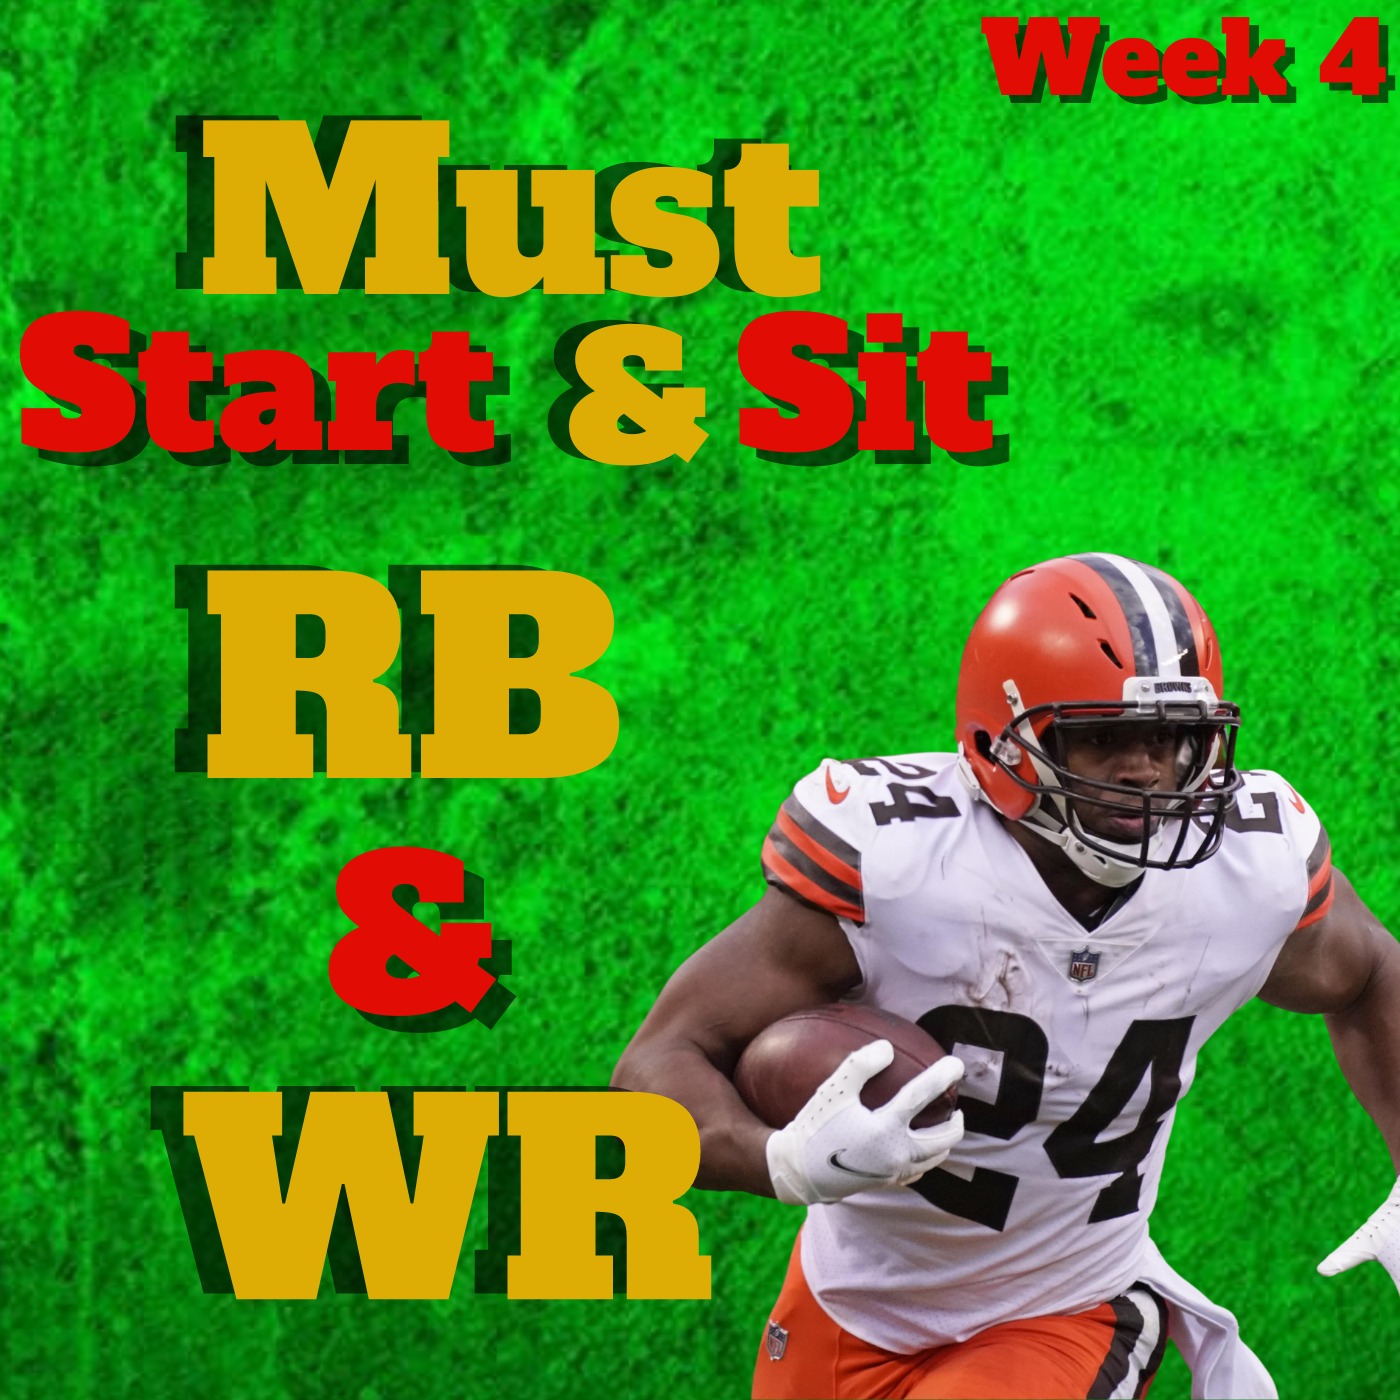 Week 4 START SIT RB WR, EVERY GAME